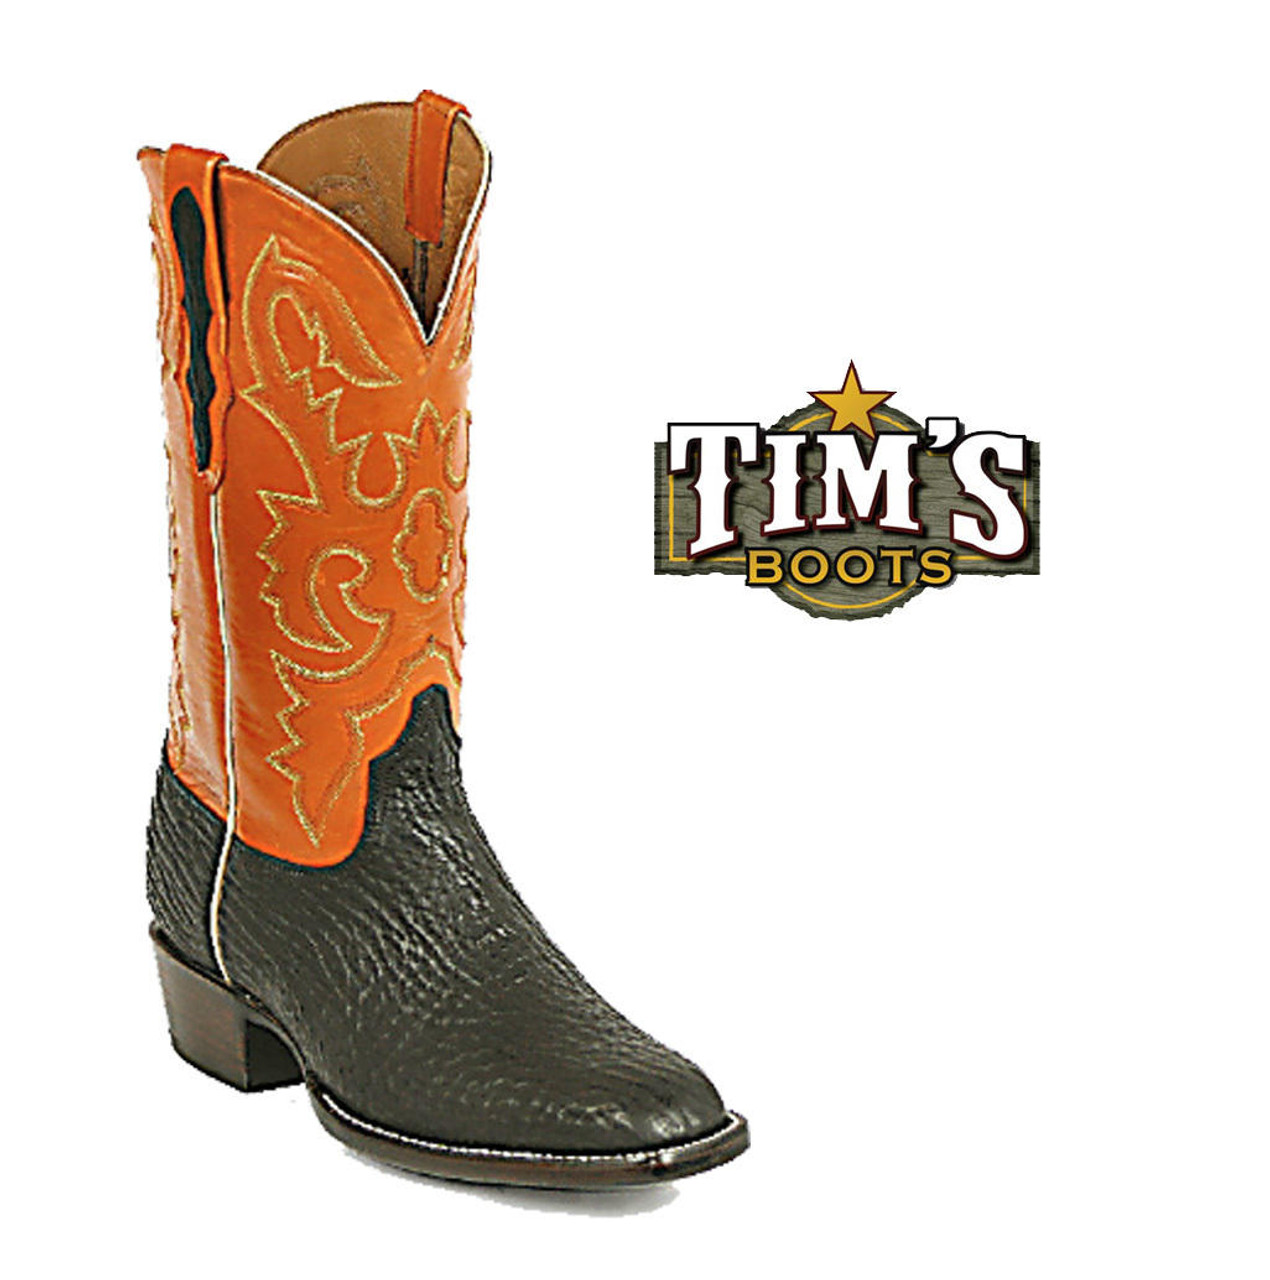 Shark Skin Cowboy Boots - Made in America by Black Jack